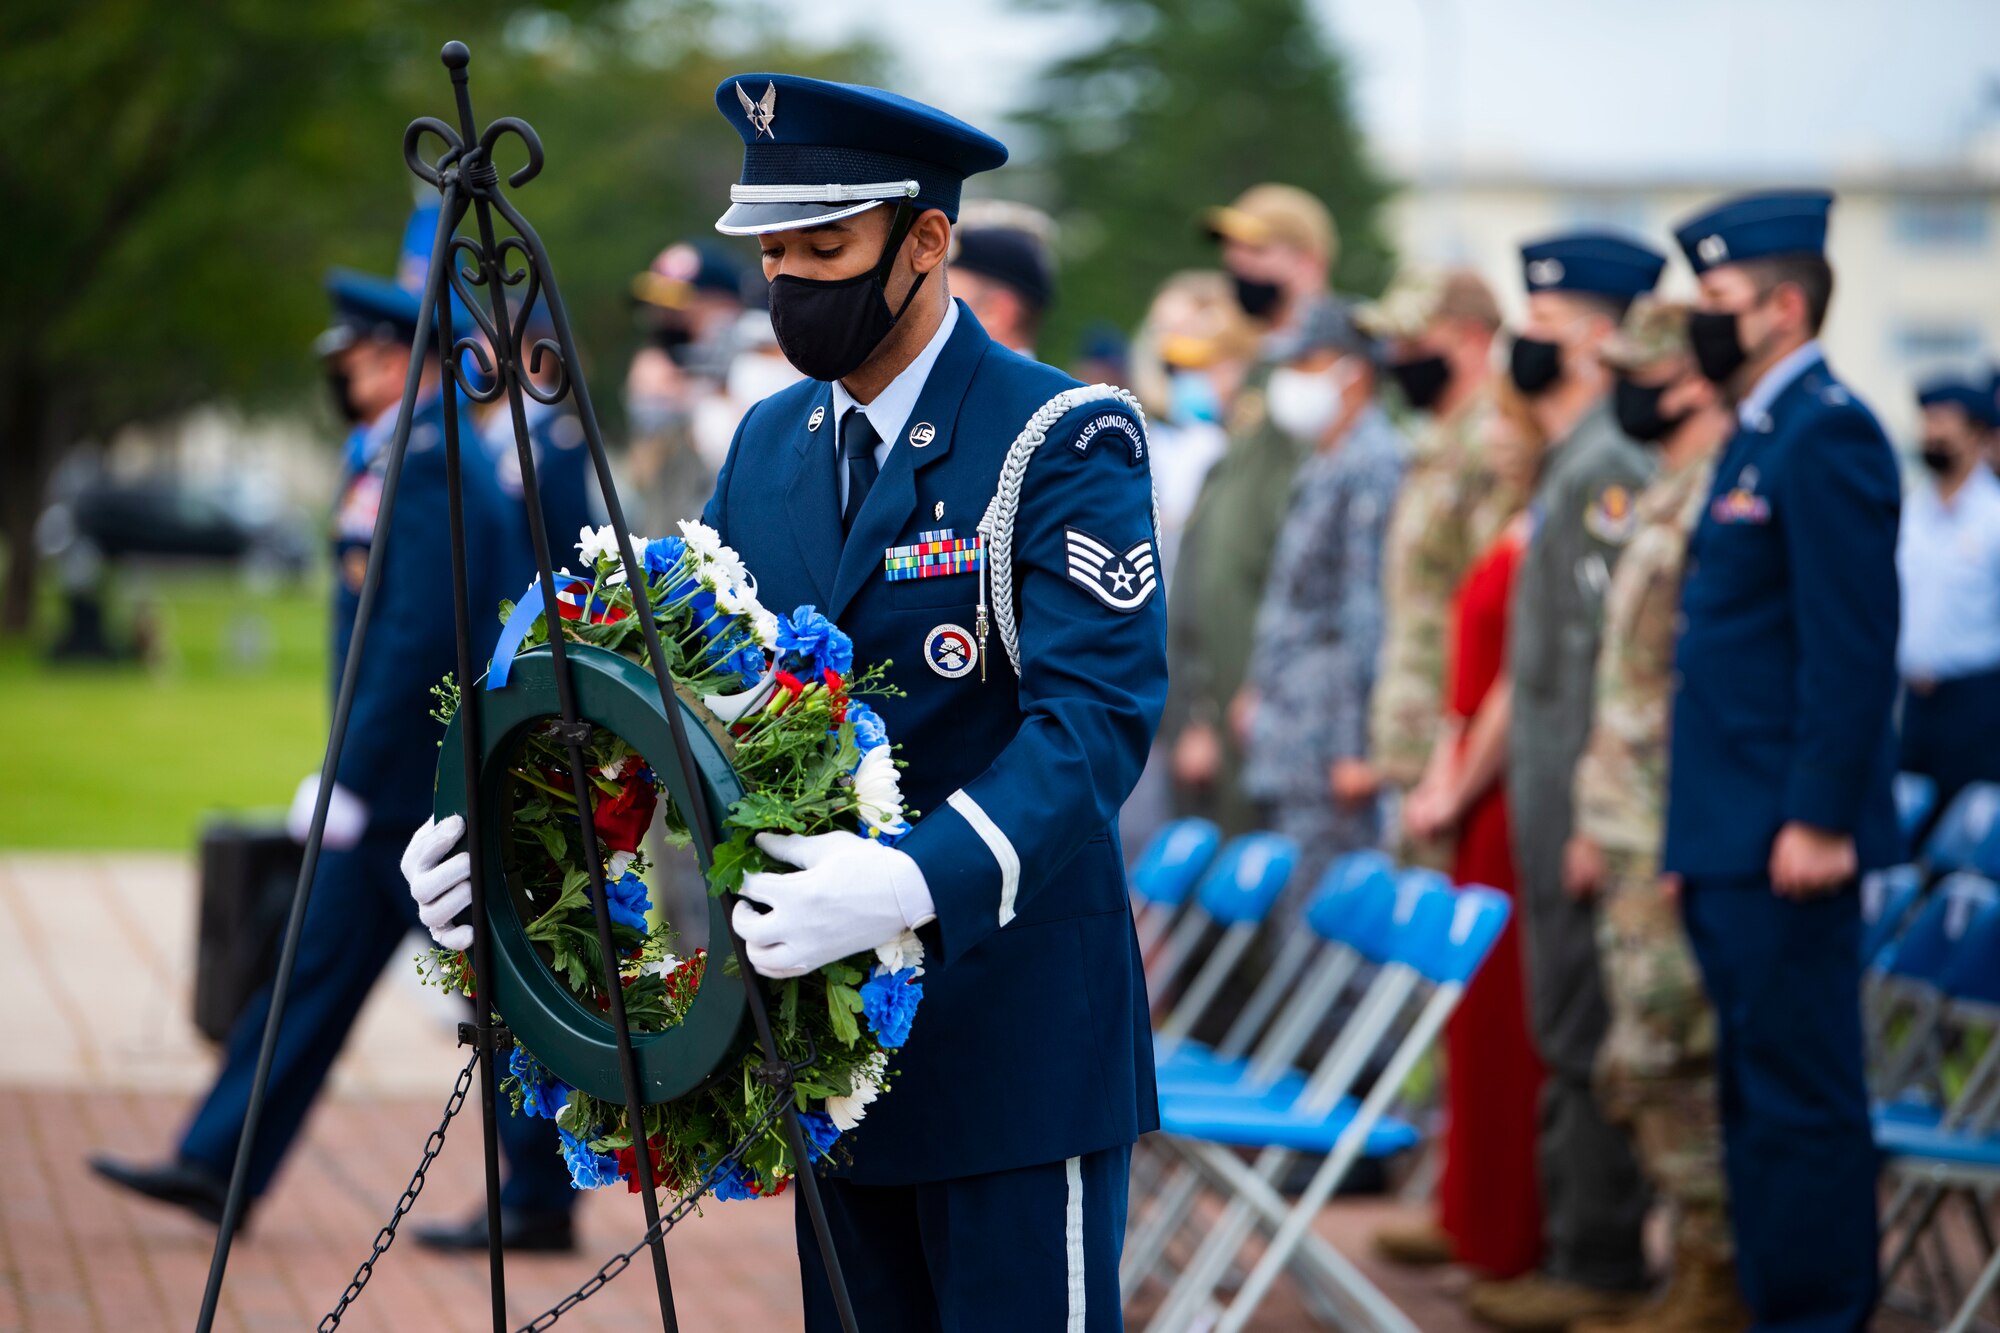 Military member in uniform picks up a wreath.